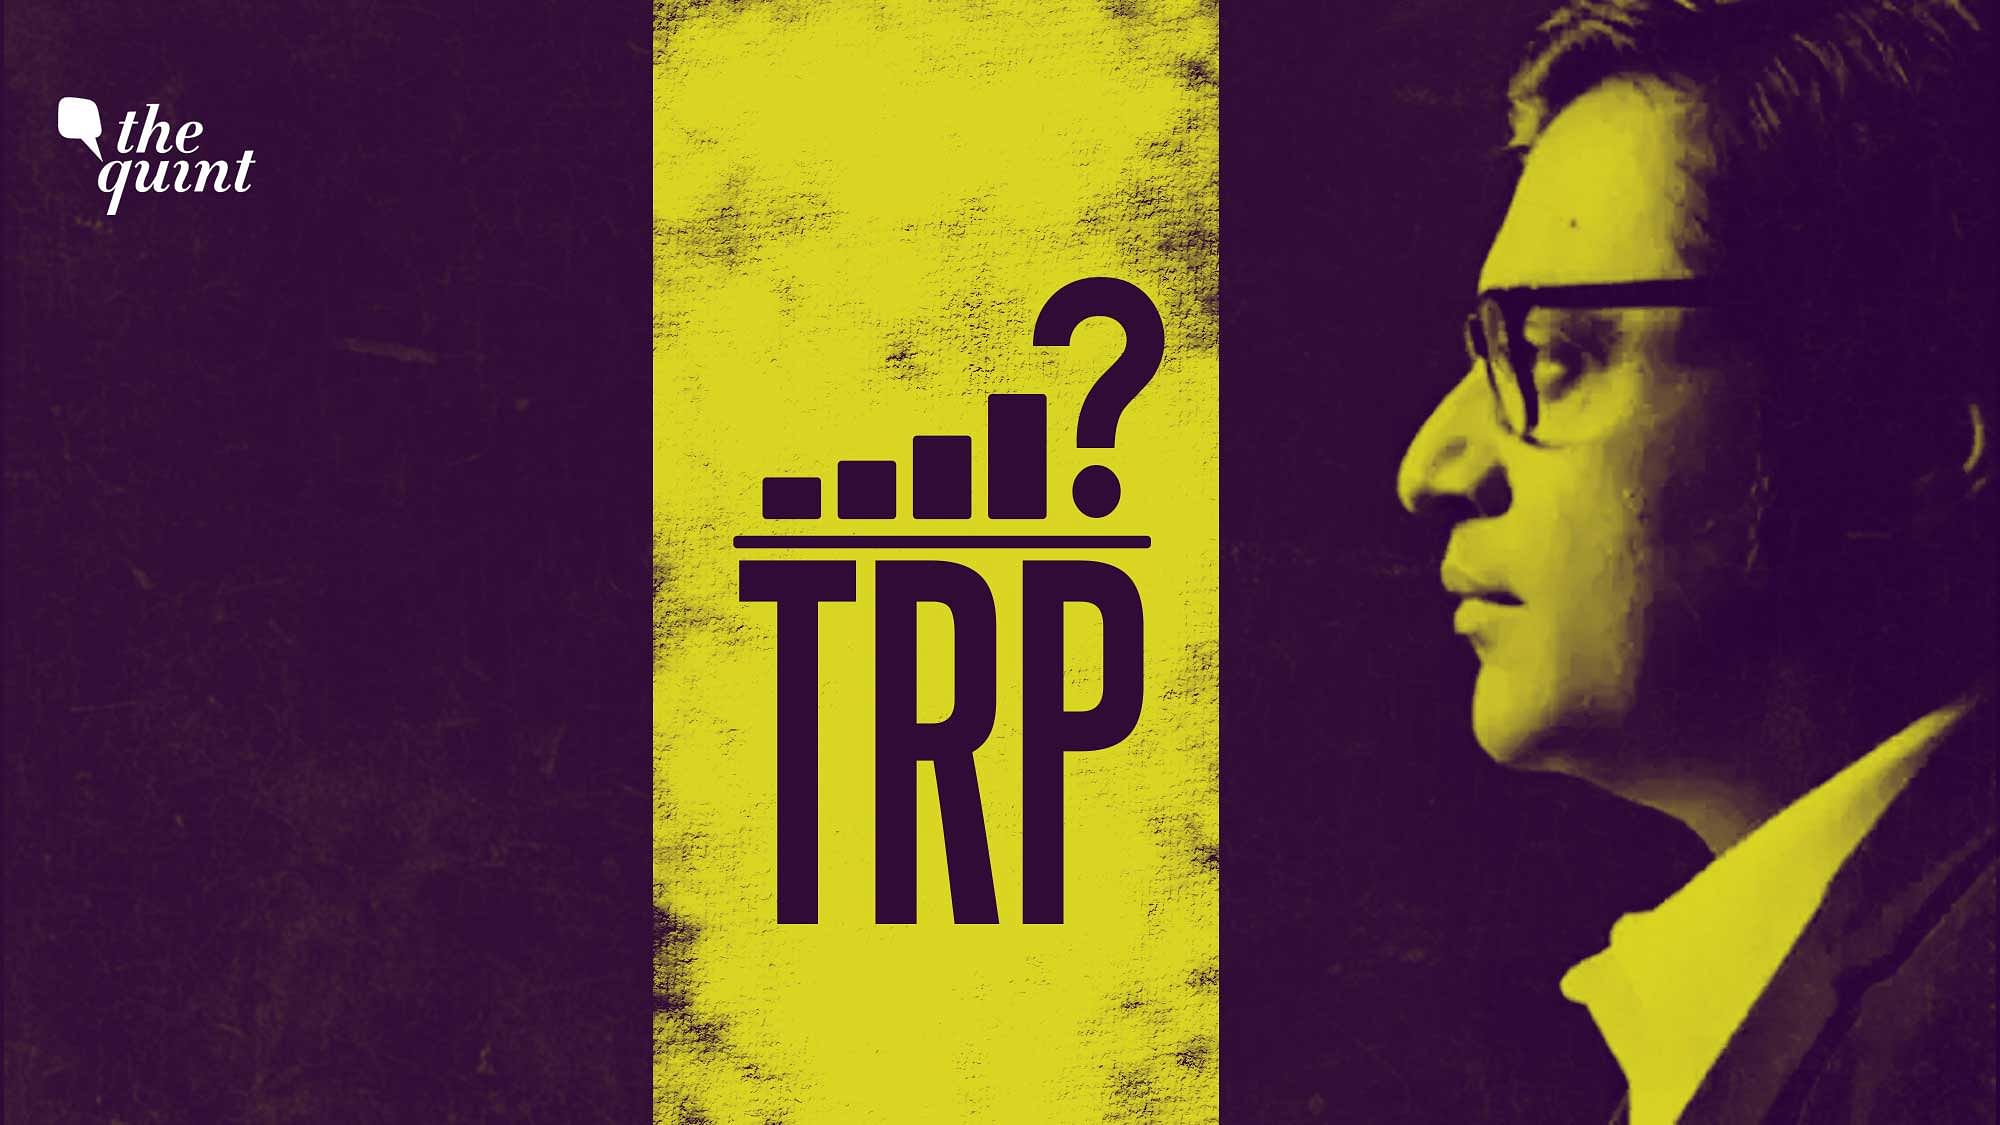 Arnab Goswami and Republic TV’s alleged TRP scam was the focus of every primetime news debate. The Quint decodes how it was covered by different channels.